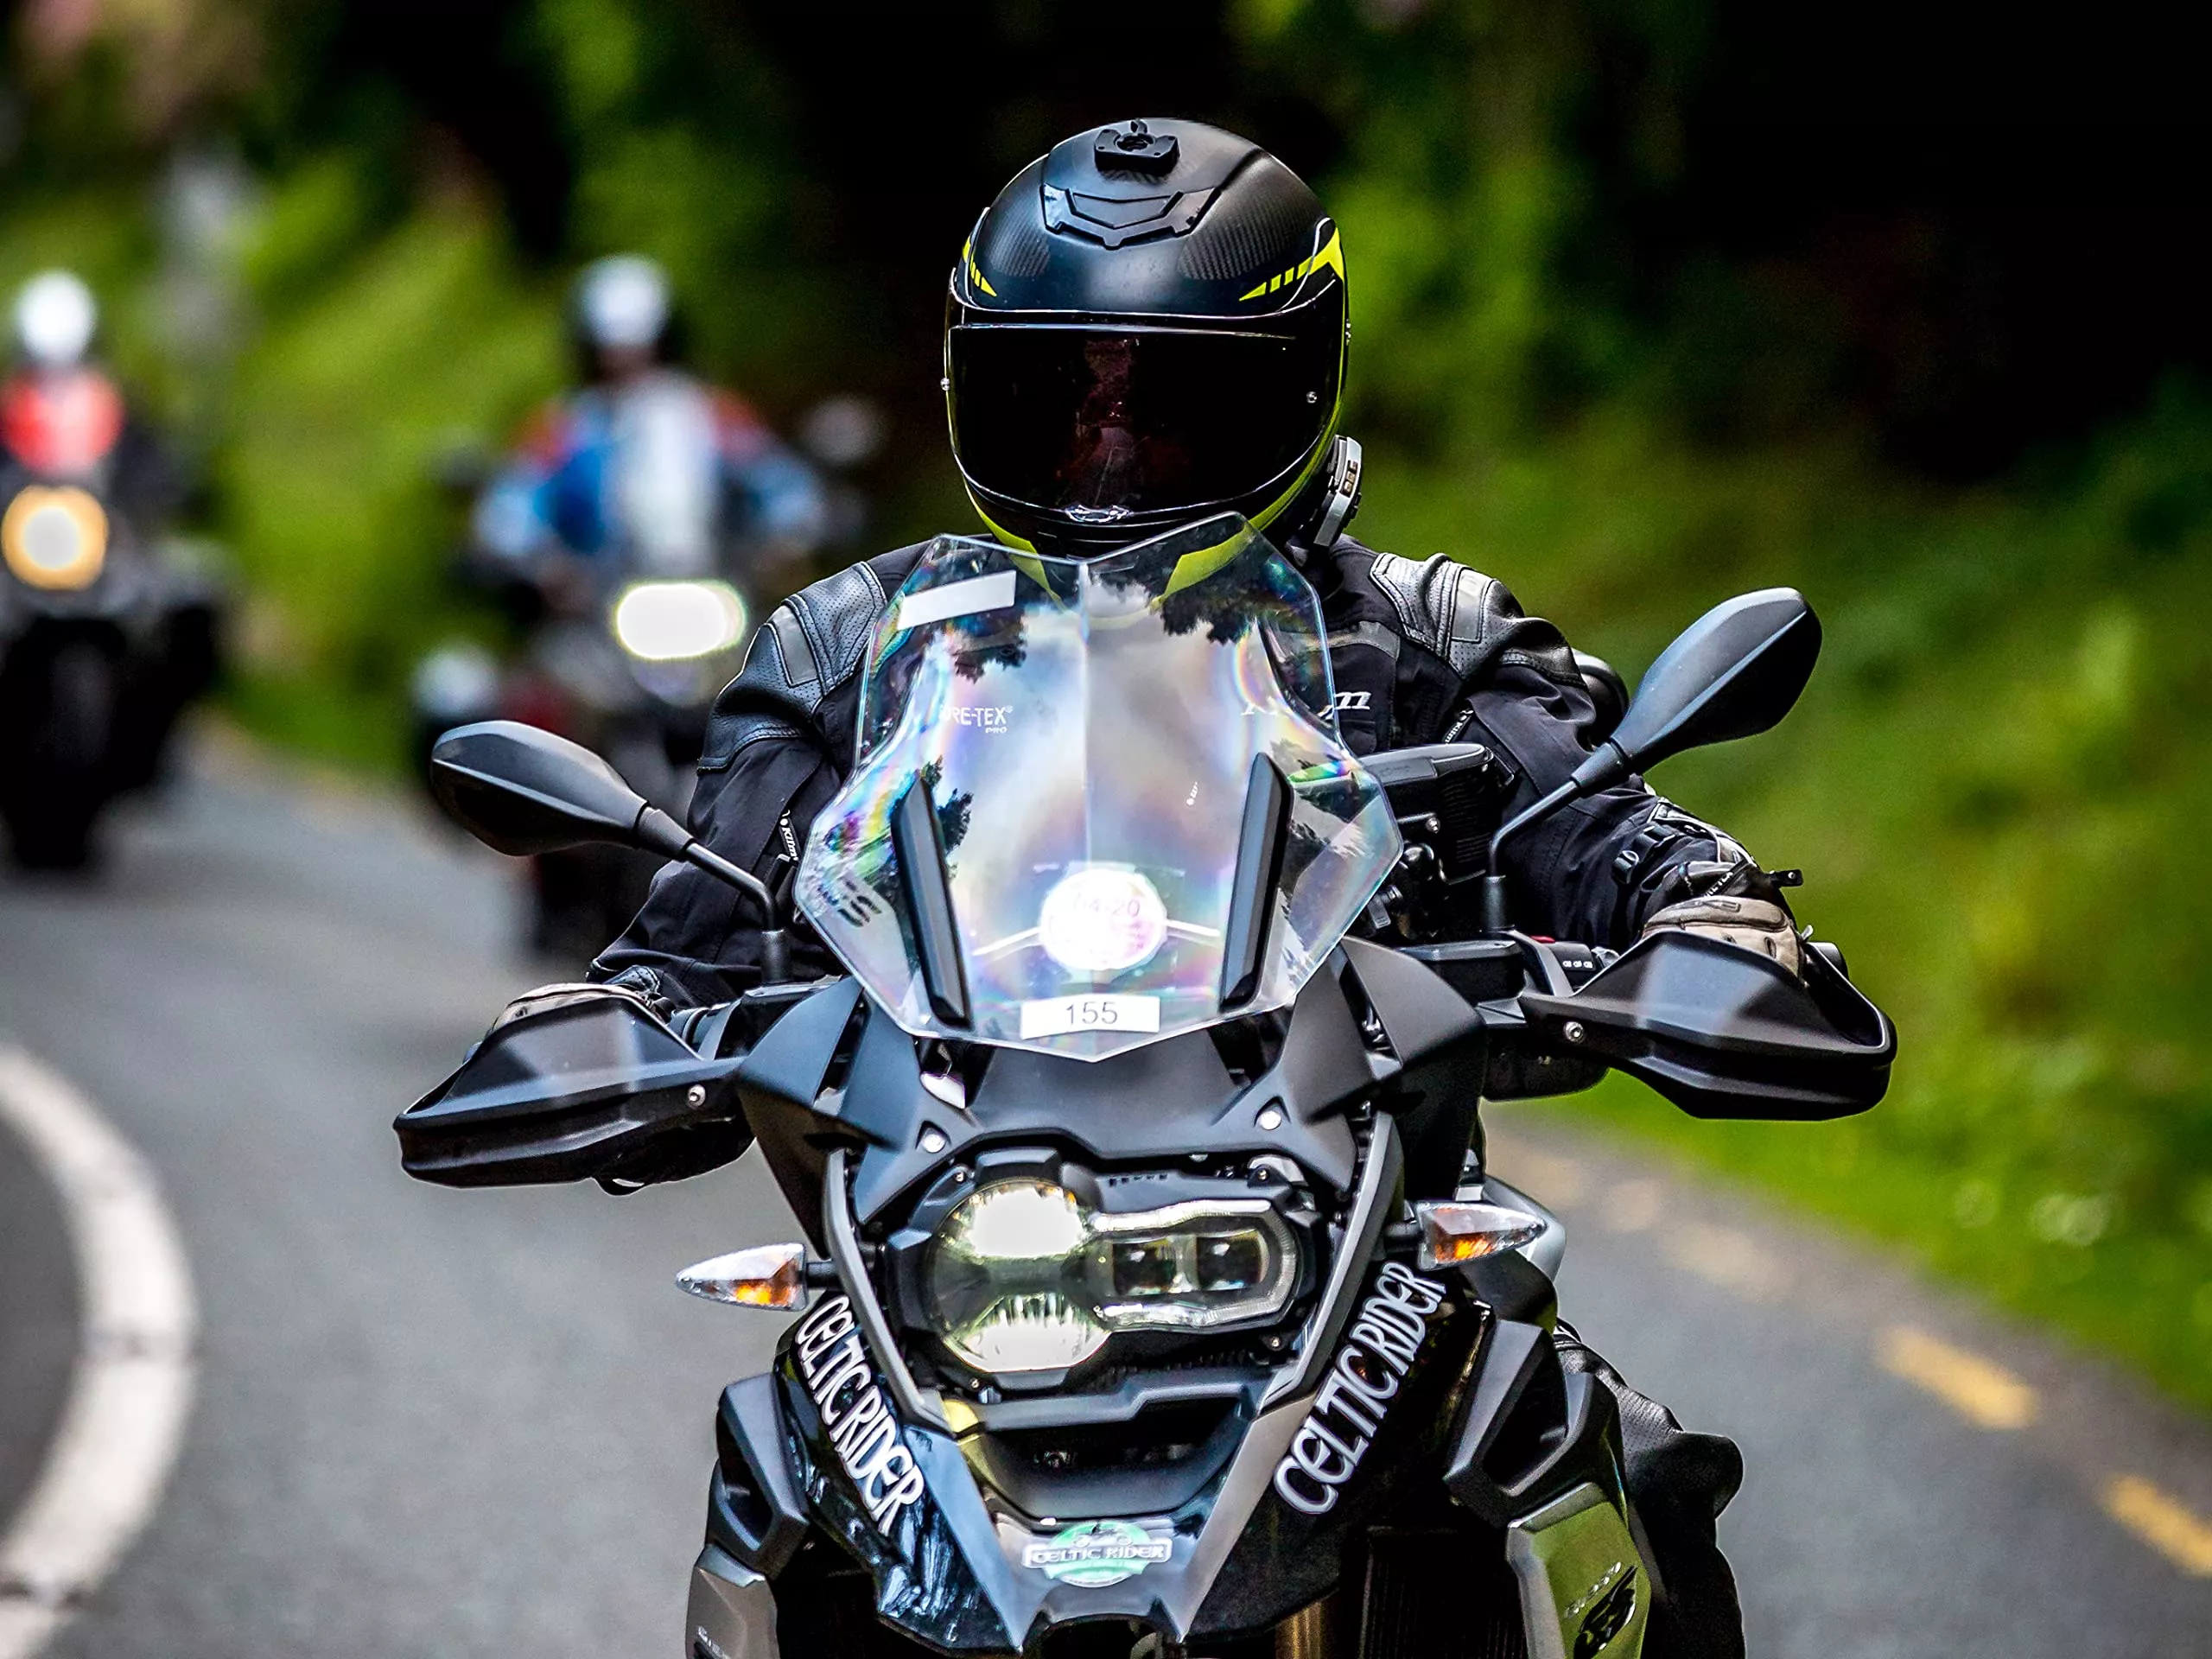 Celtic Rider Ireland in Ireland, Europe | Motorcycles - Rated 0.9